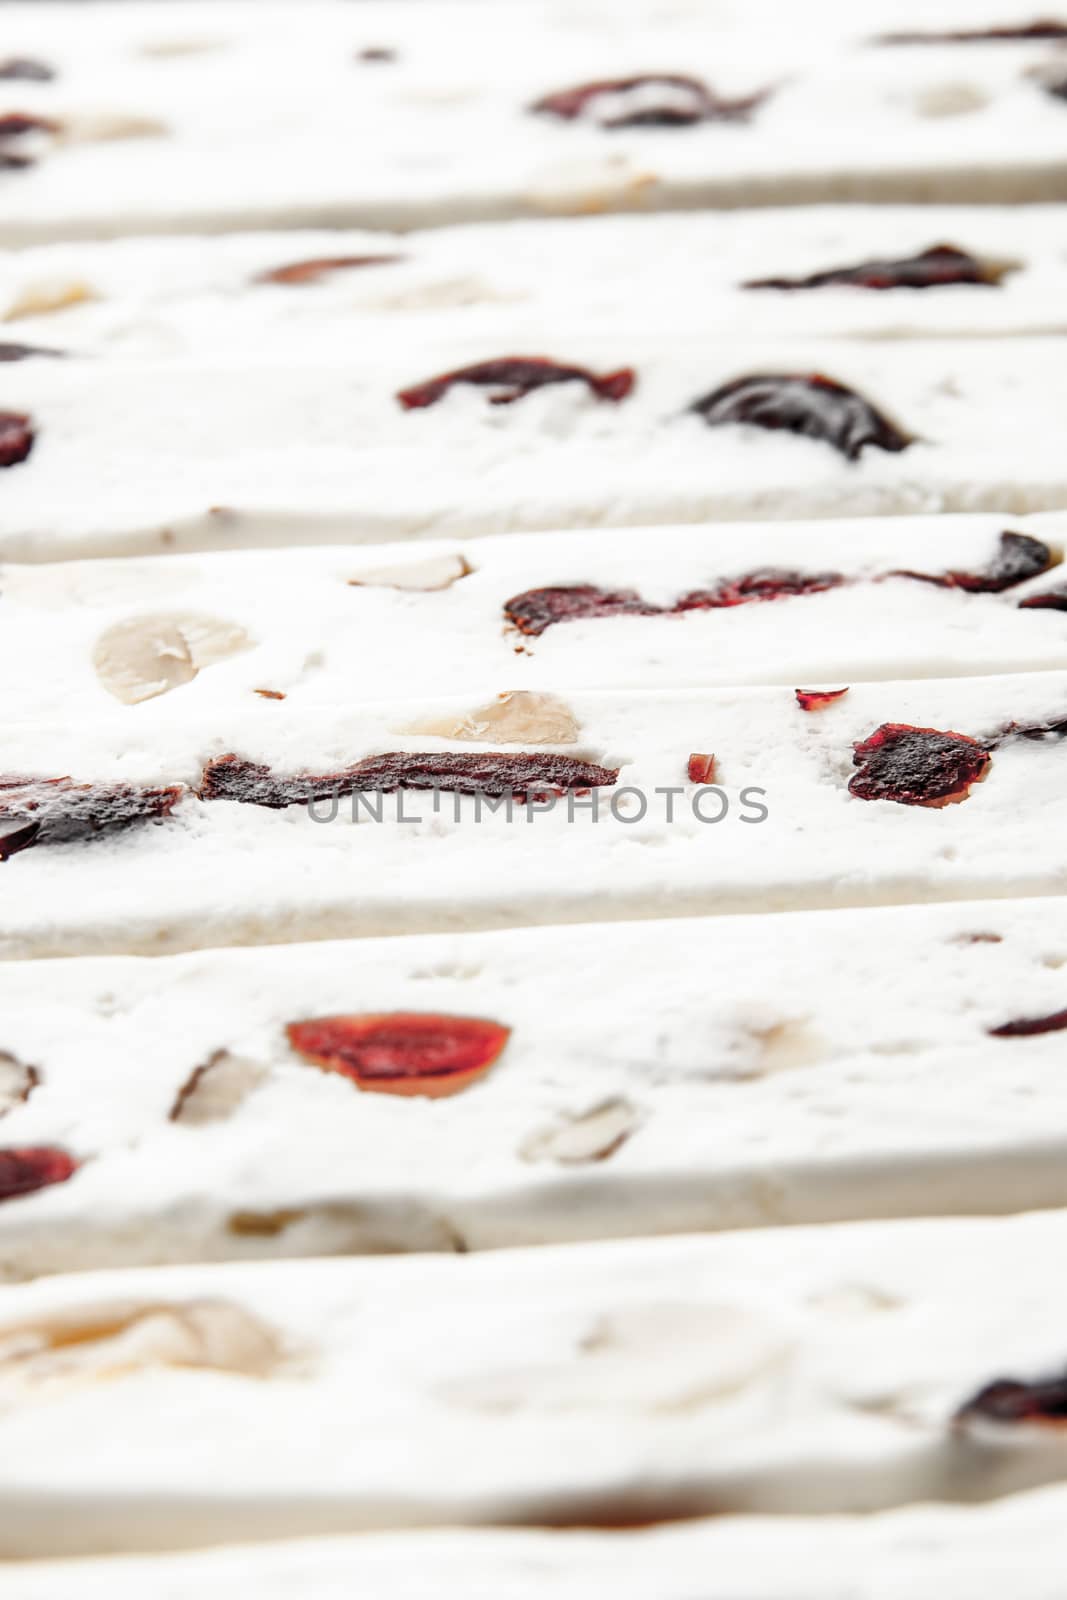 Nougat with fruit and nuts background vertical by Deniskarpenkov